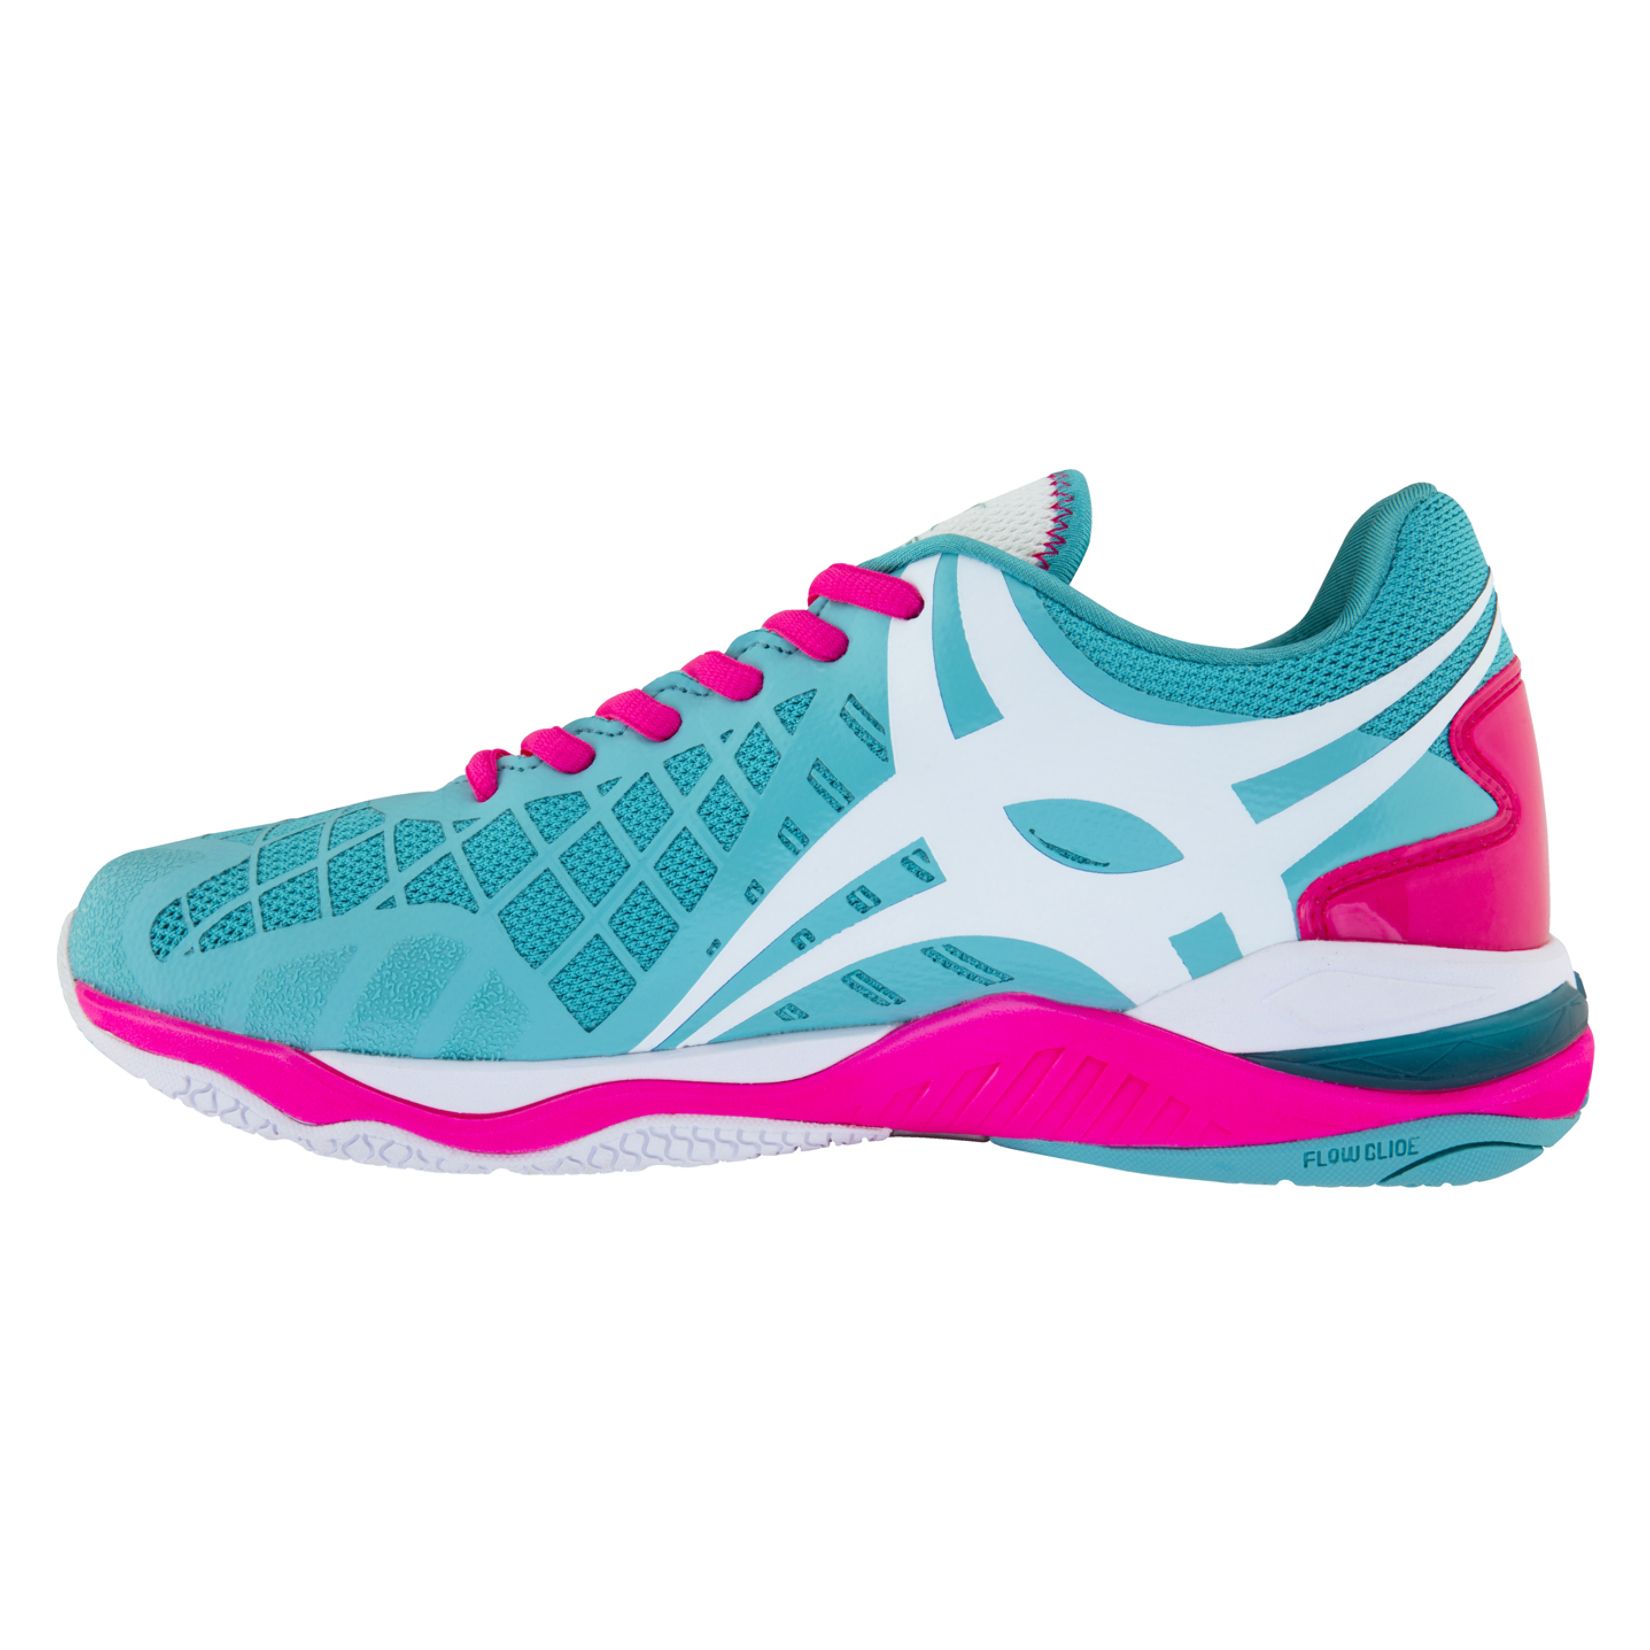 Gilbert Synergie Pro Netball Shoes